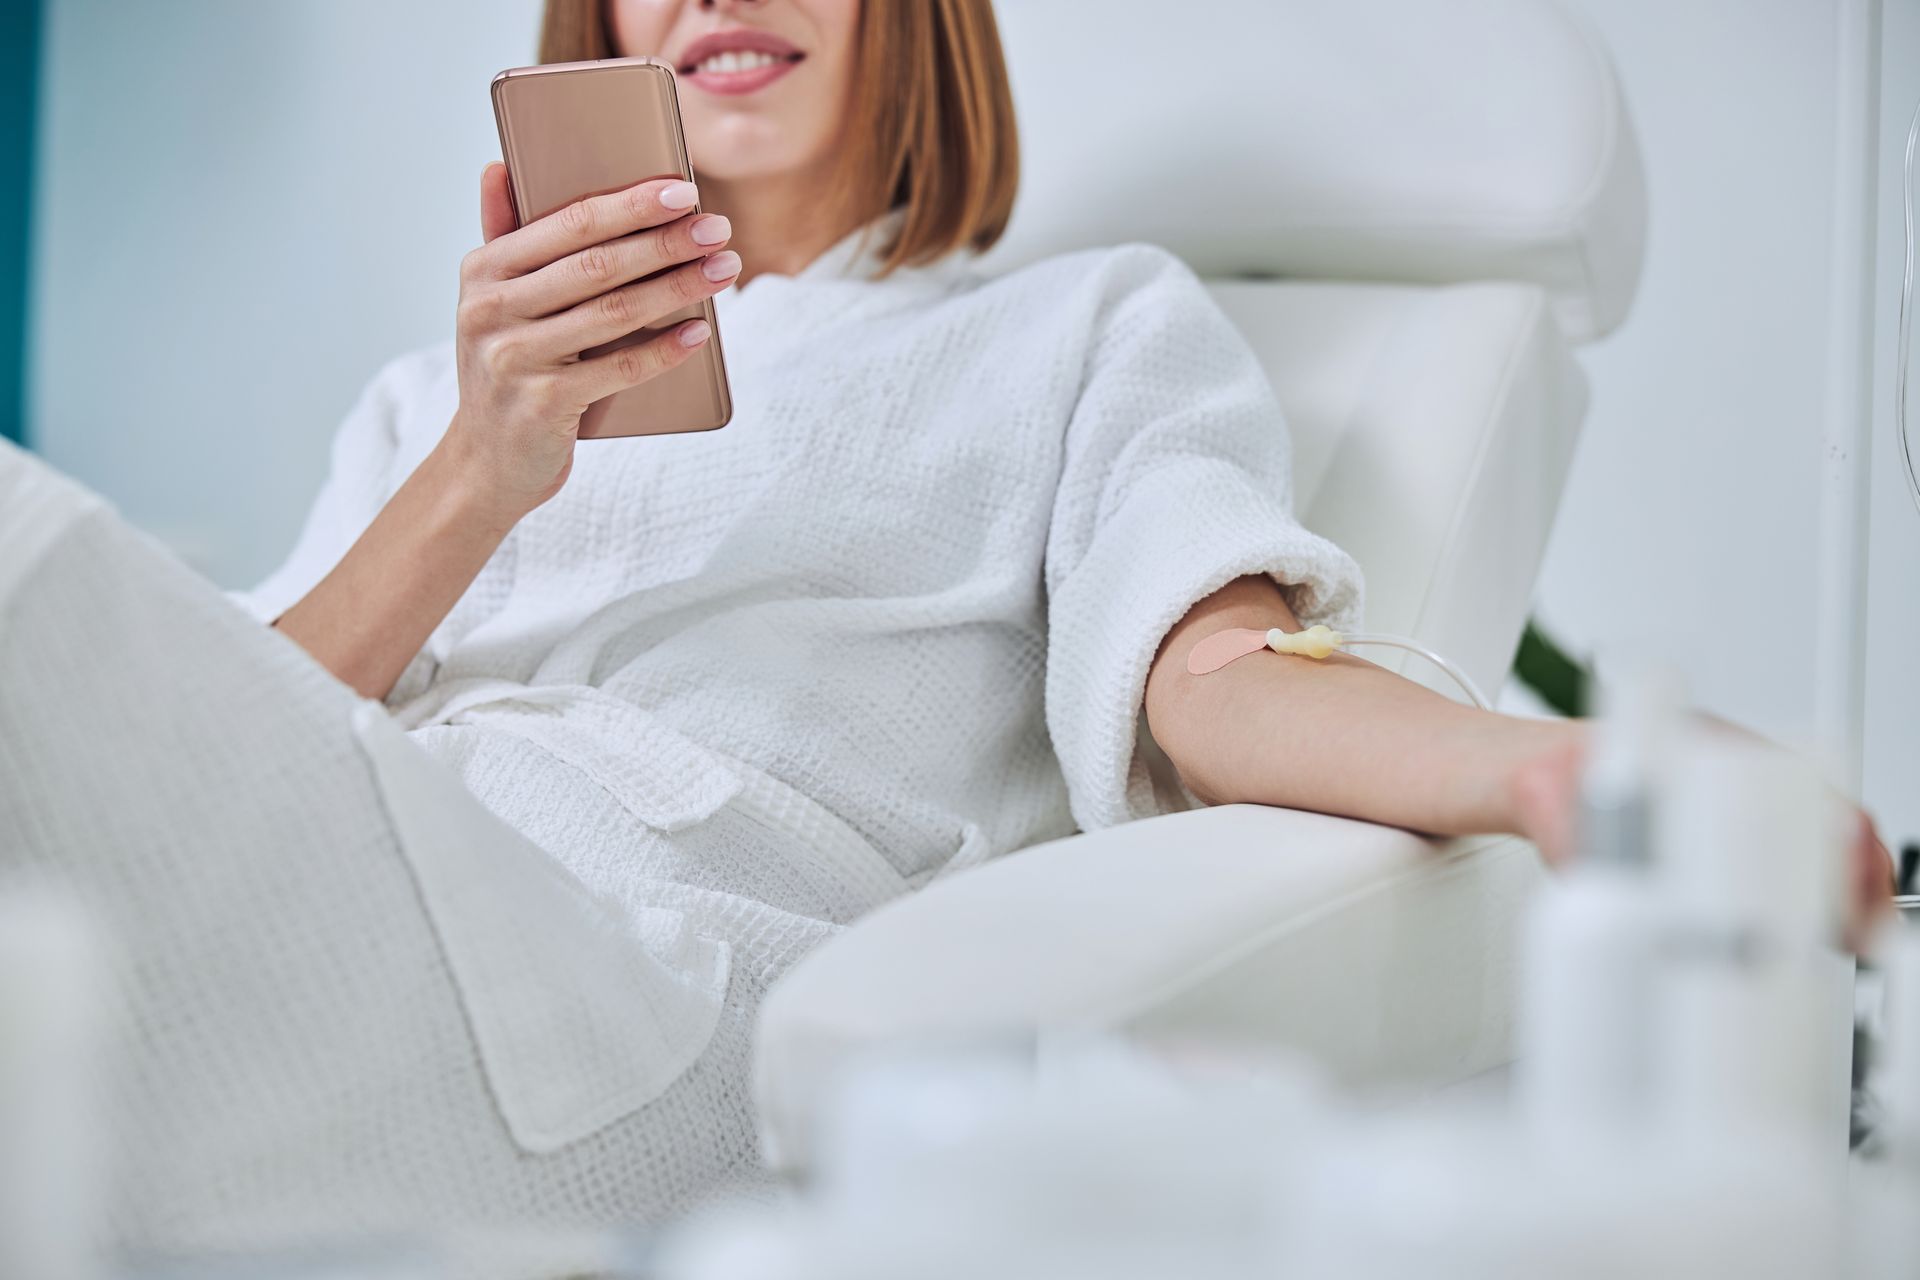 a woman is sitting in a chair holding a cell phone .